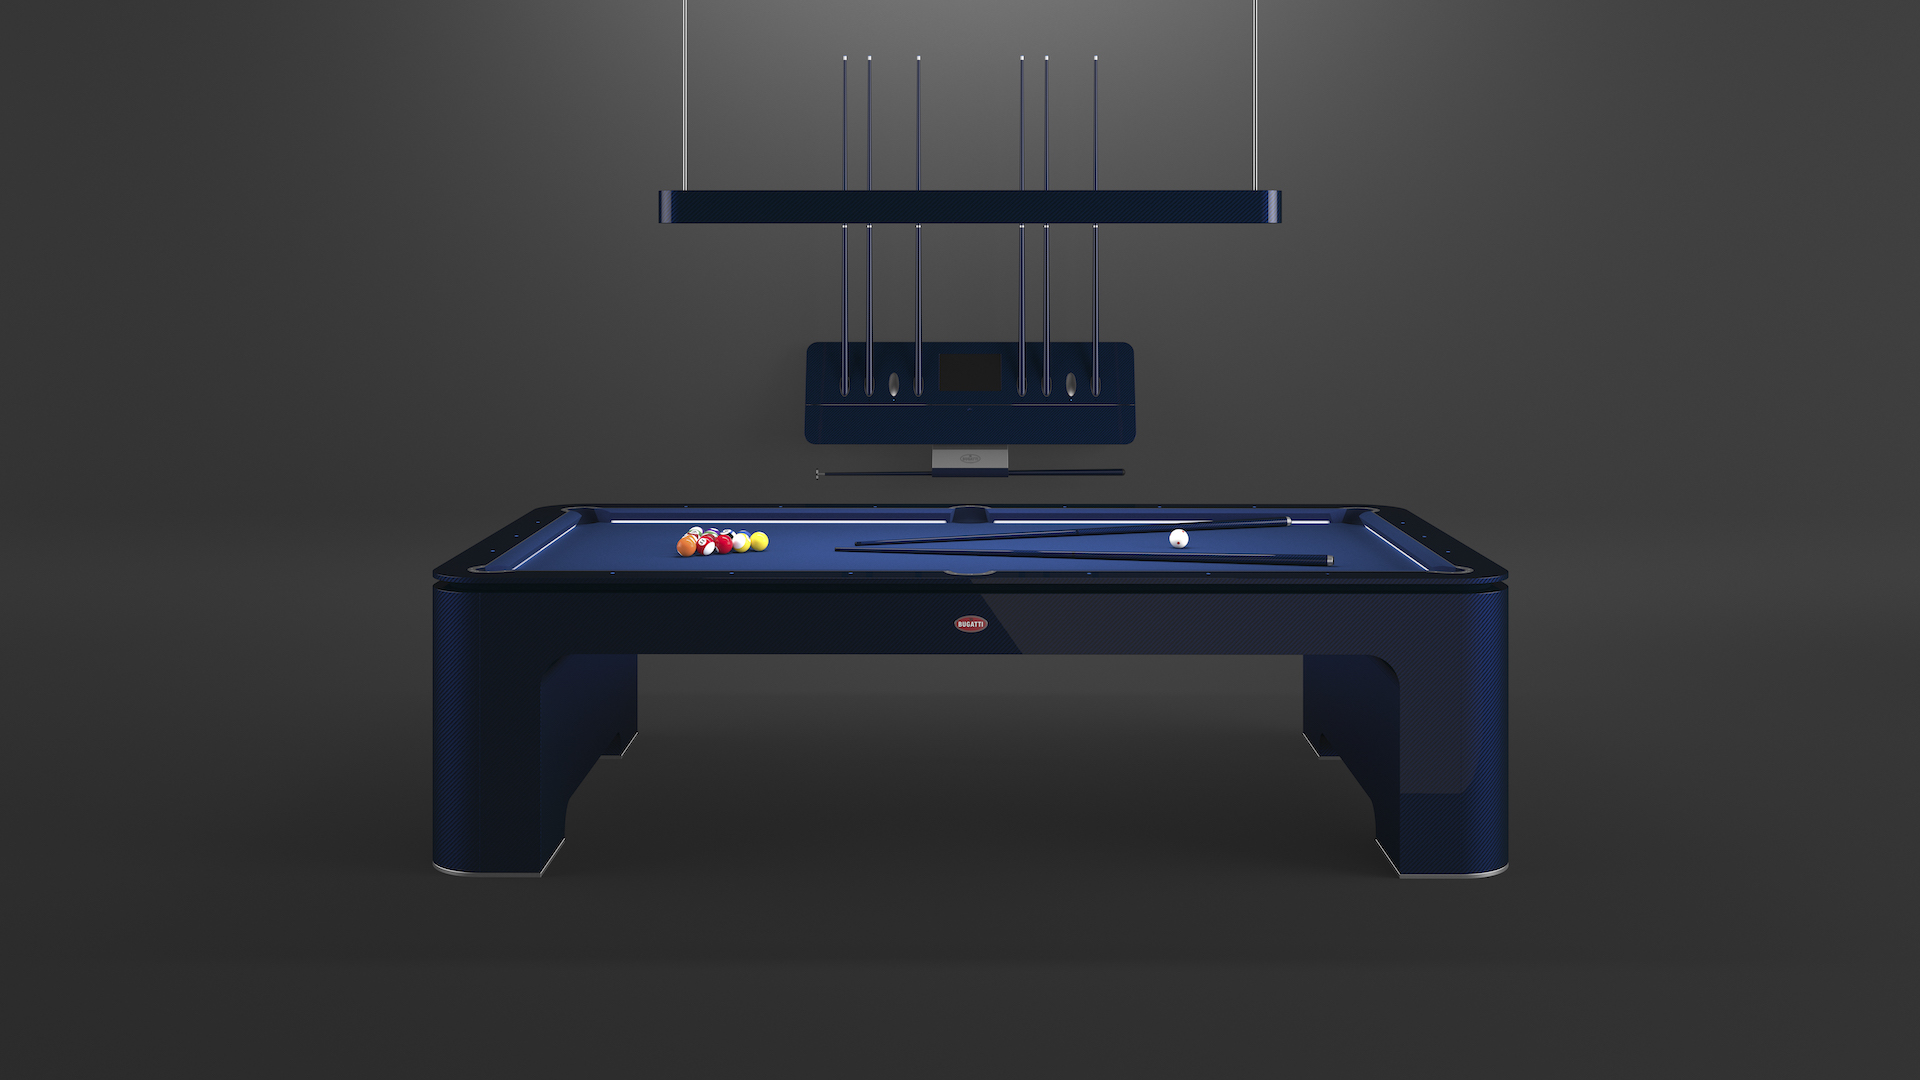 An image of a Bugatti pool table finished in blue.